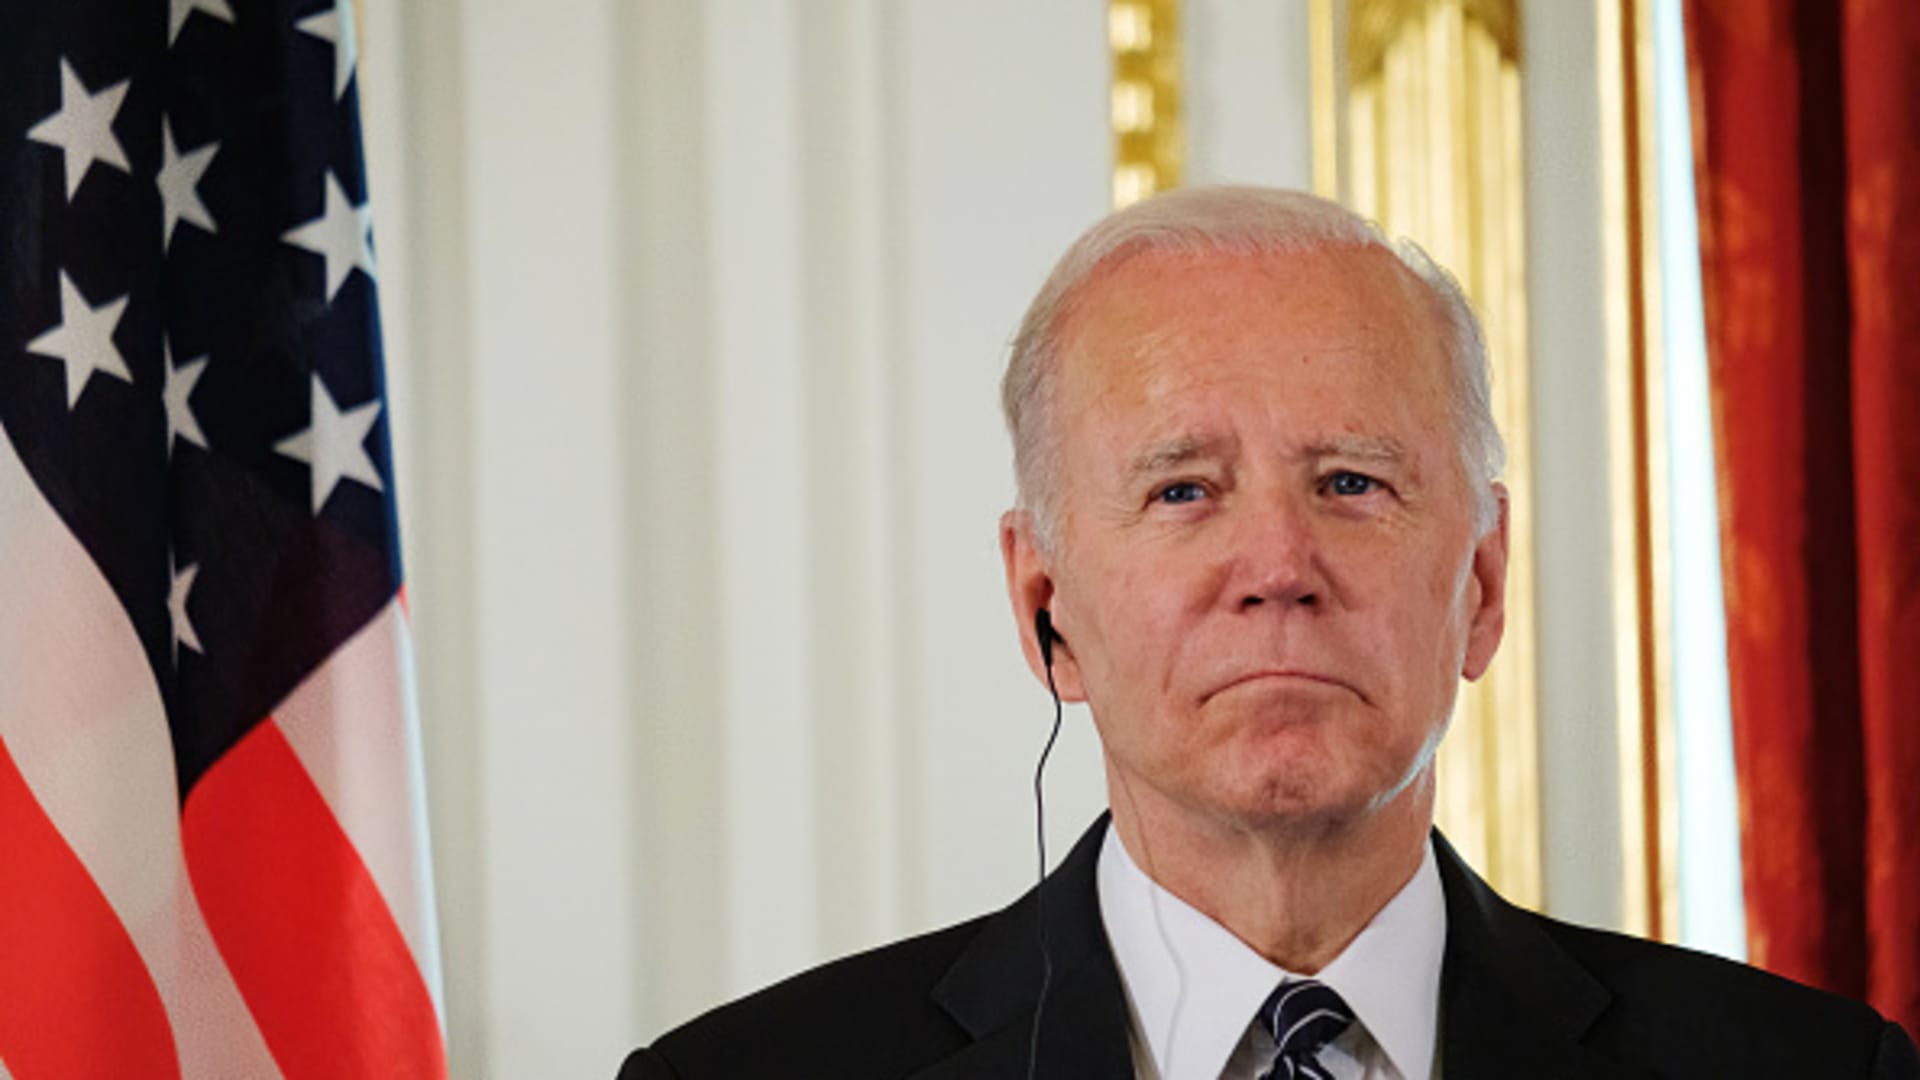 Biden on Monday attended a joint press conference with Japanese Prime Minister Fumio Kishida in Tokyo, Japan.